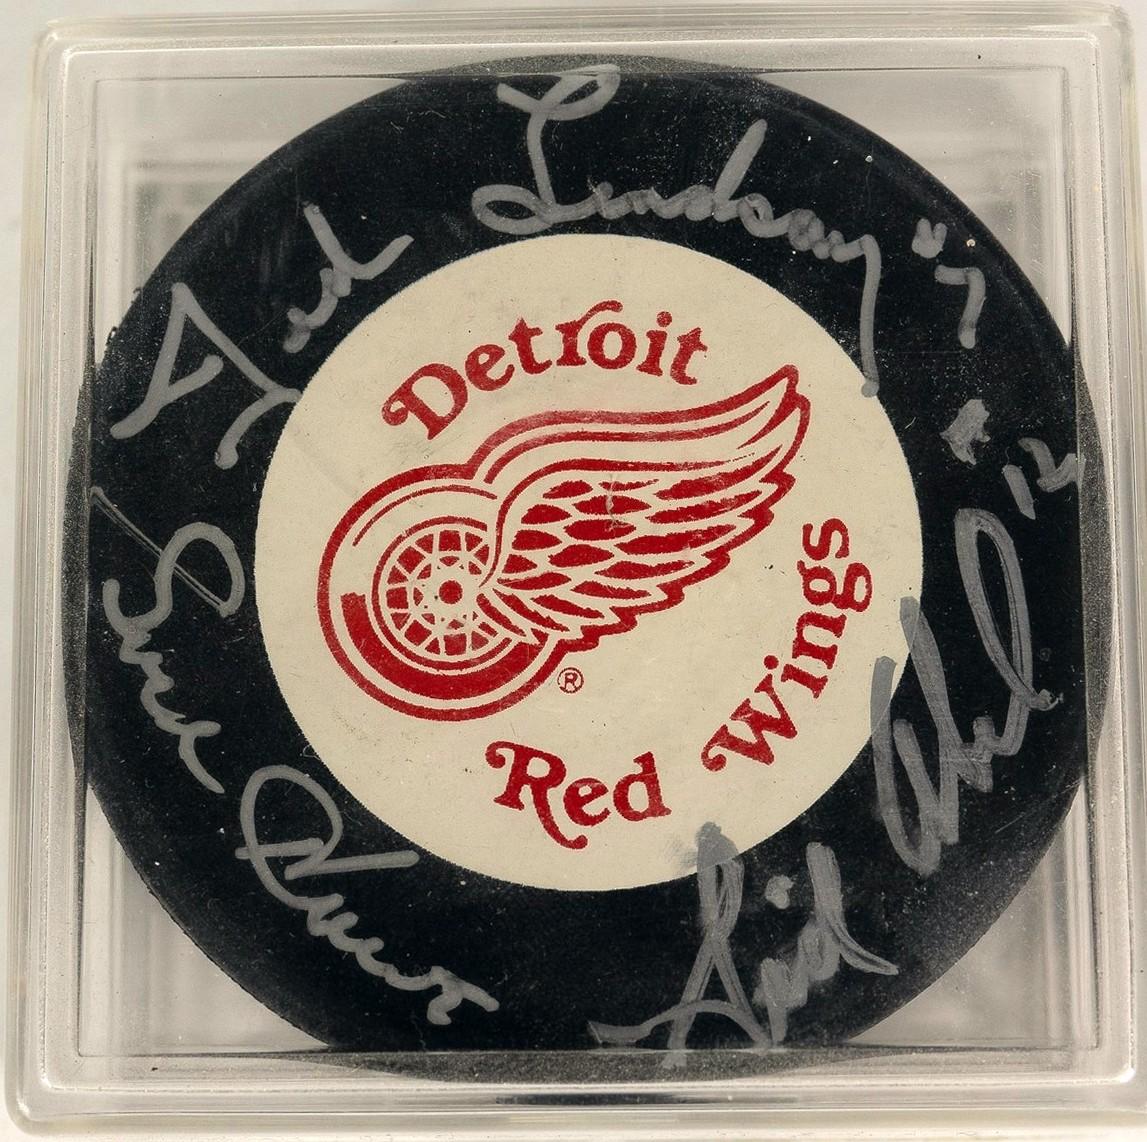 AUTOGRAPHED DETROIT RED WINGS PUCK